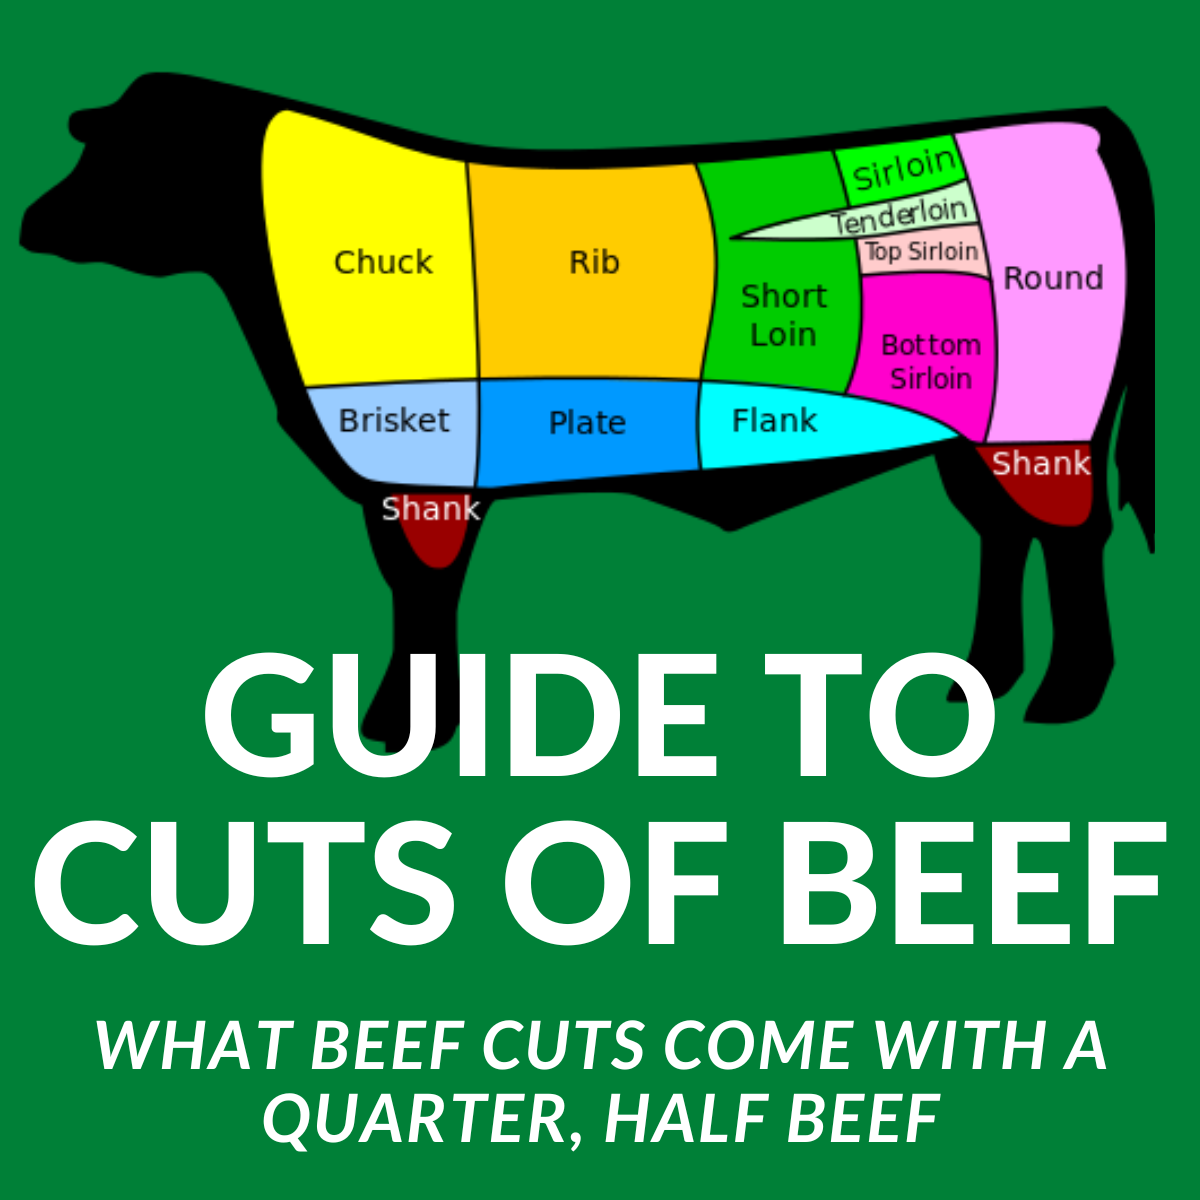 DSR Cattle - Beef Sizes and Cuts